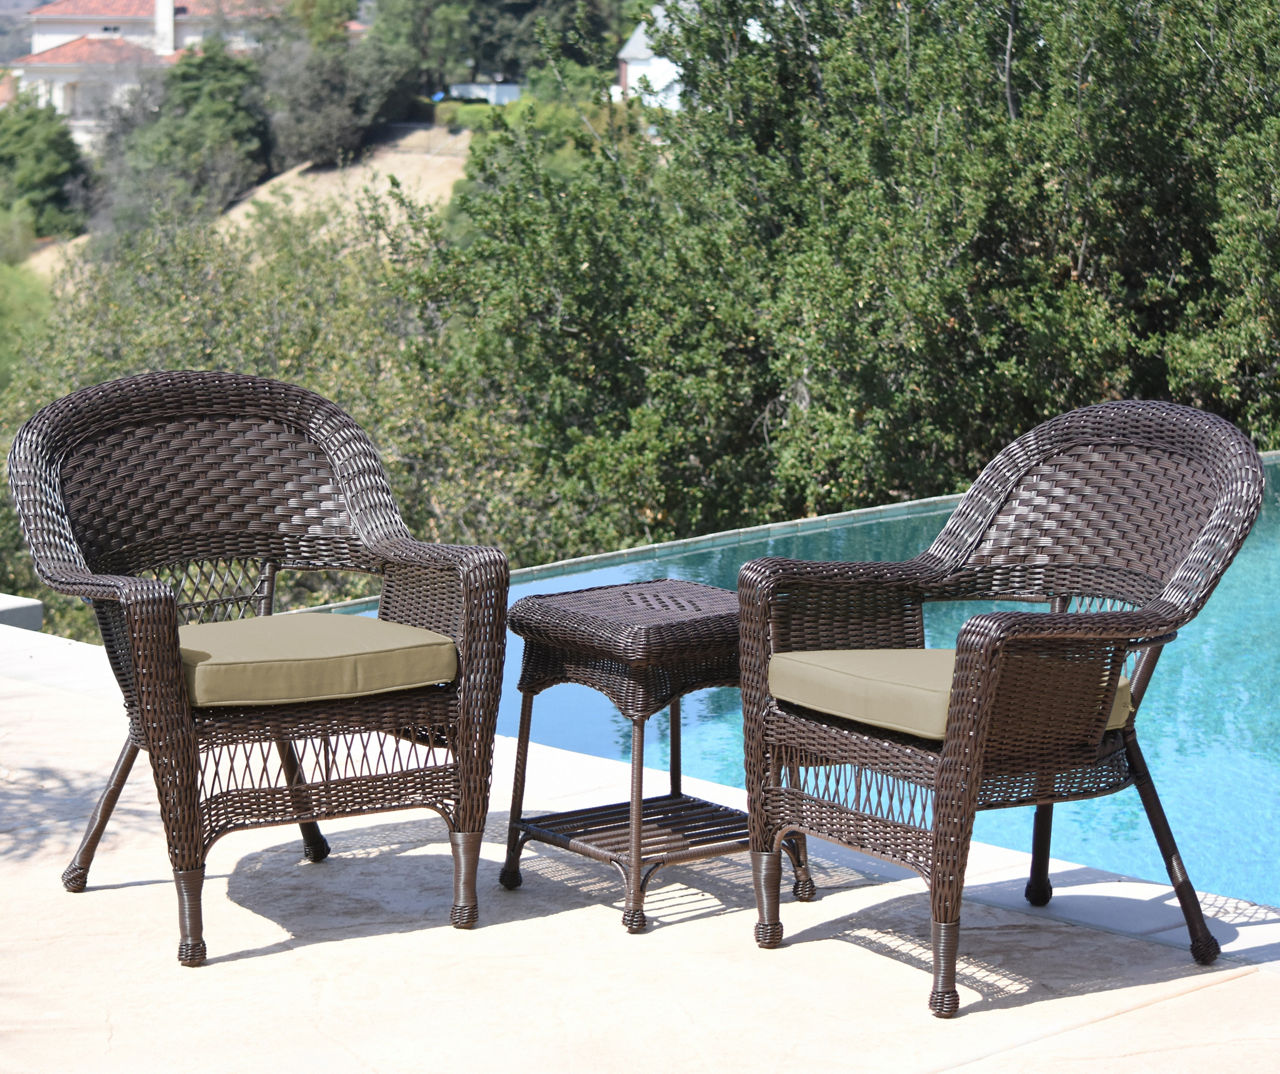 Espresso 3-Piece Patio All-Weather Wicker Chat Set with Tan Cushions